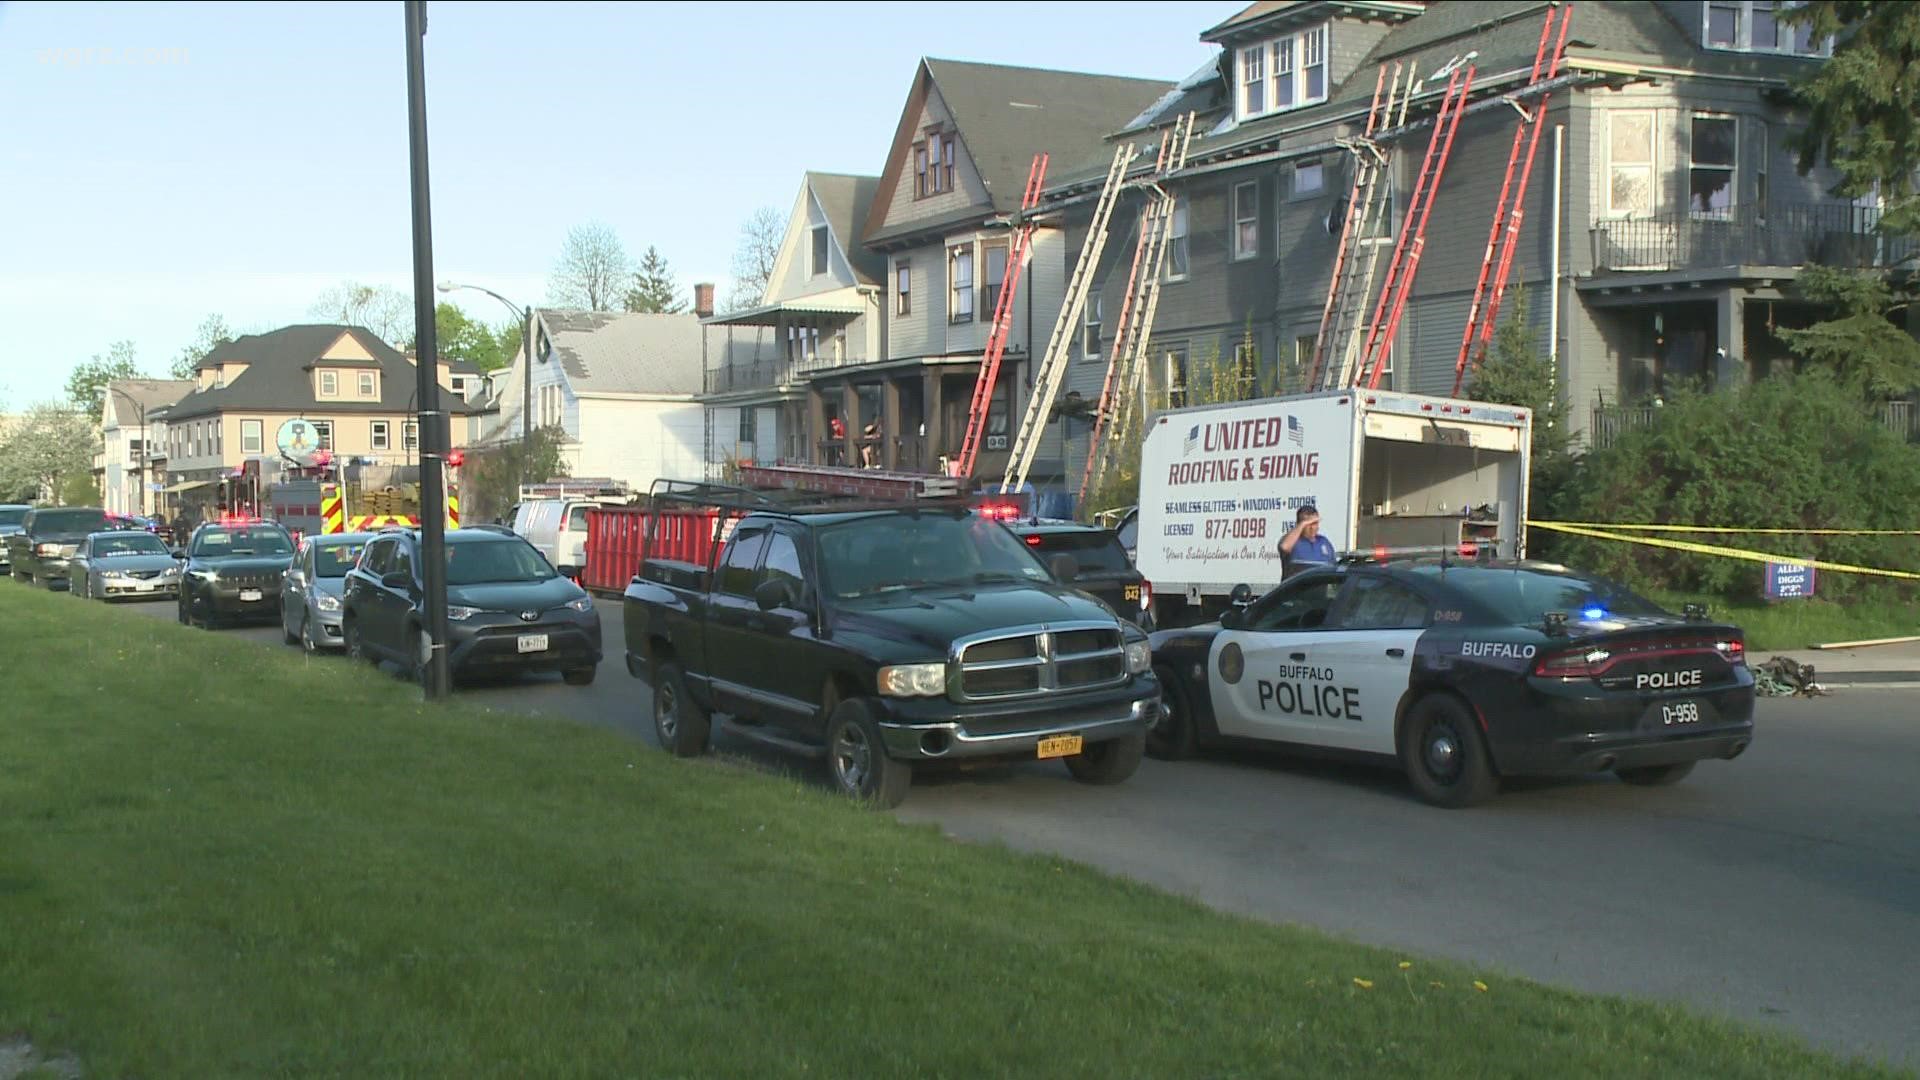 A 10-year-old boy is in the hospital after being hit by a vehicle on Forest Ave in Buffalo.